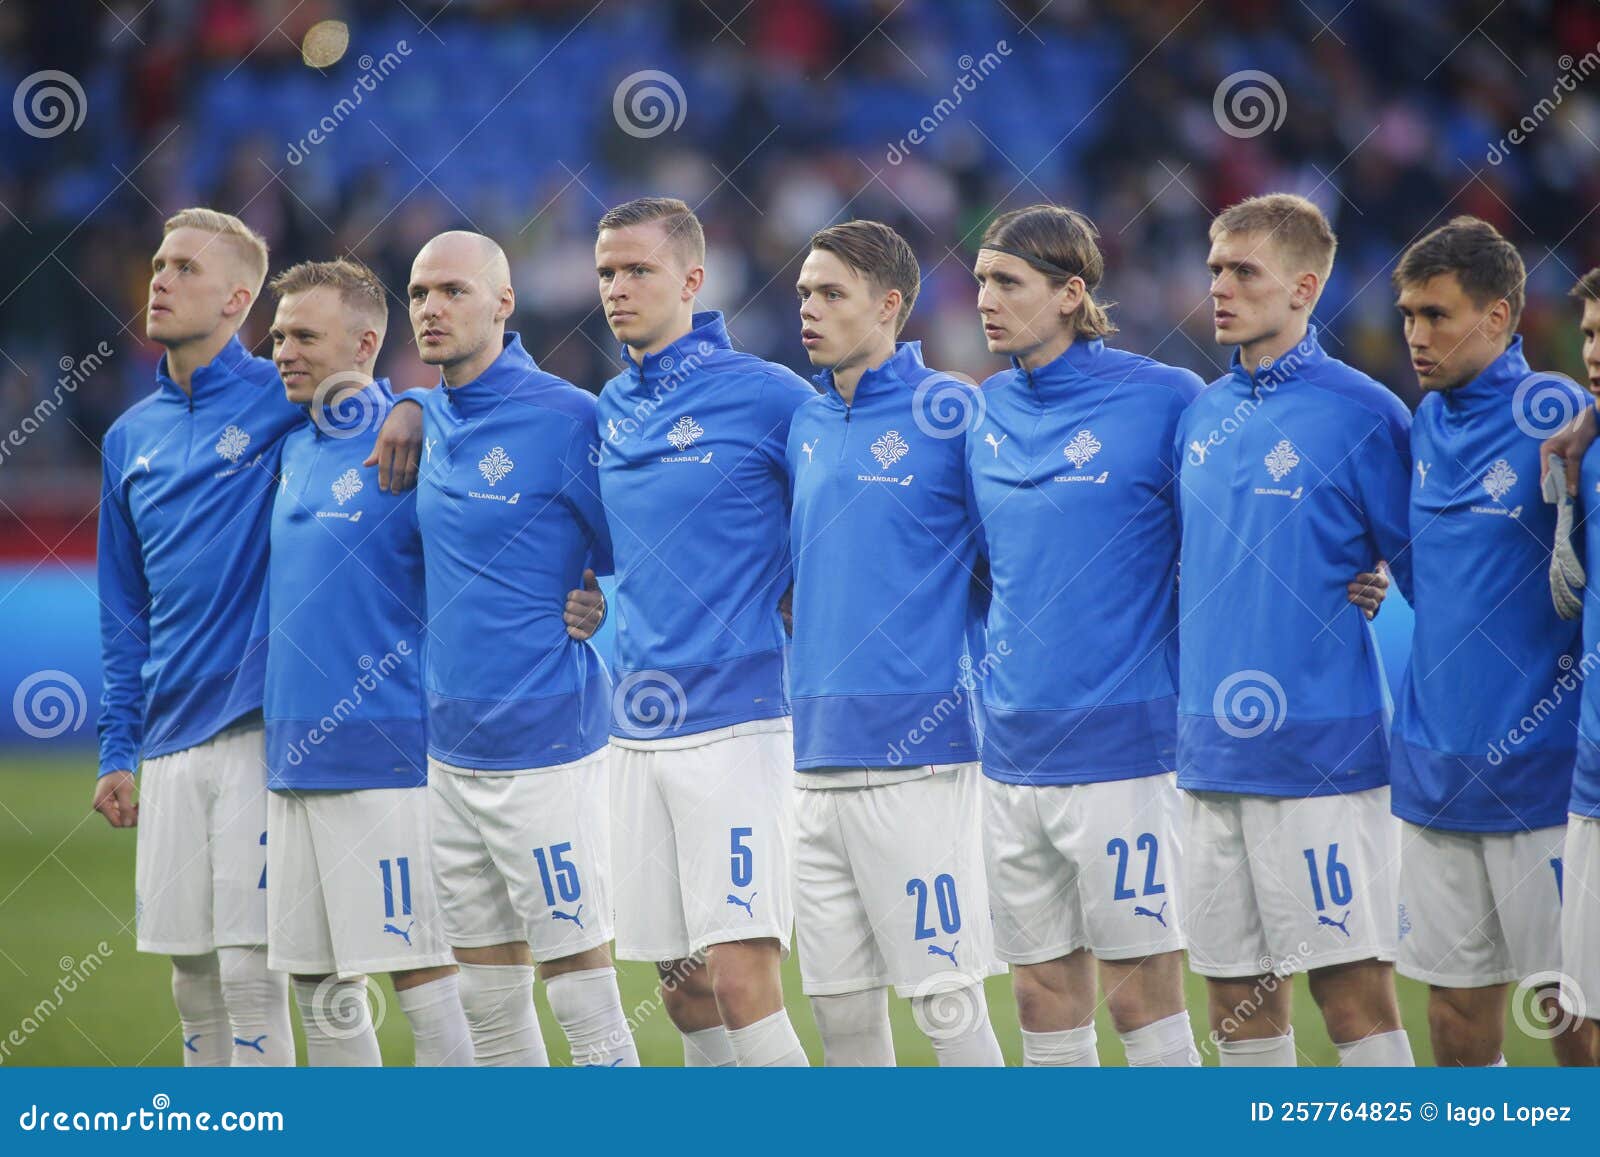 The Iceland Team Line Up for a Team Photo Prior To the International Friendly Match between Spain and Iceland Editorial Image